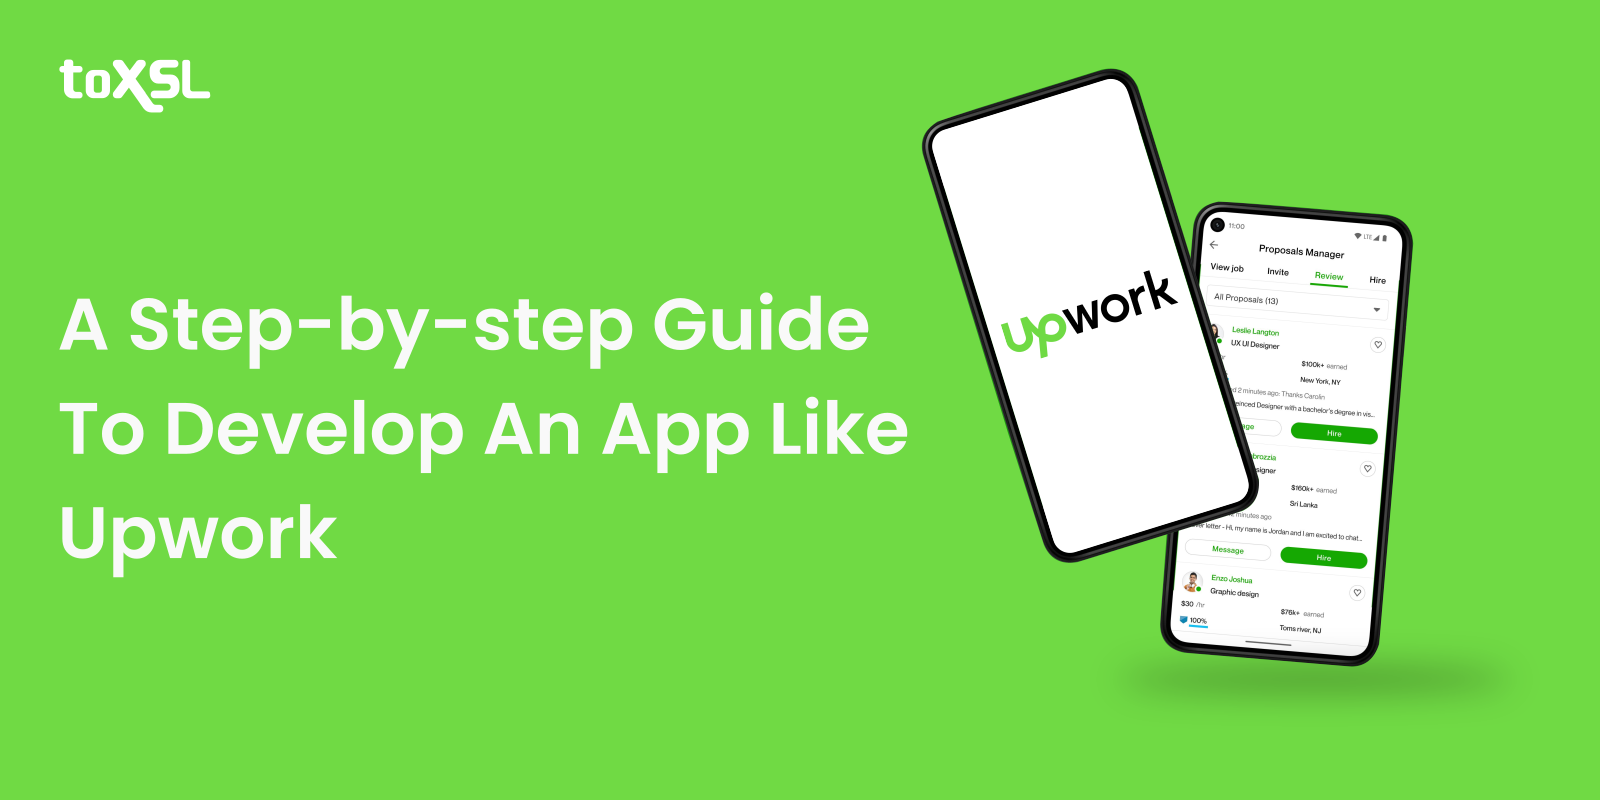 A Step-by-step Guide To Develop An App Like Upwork